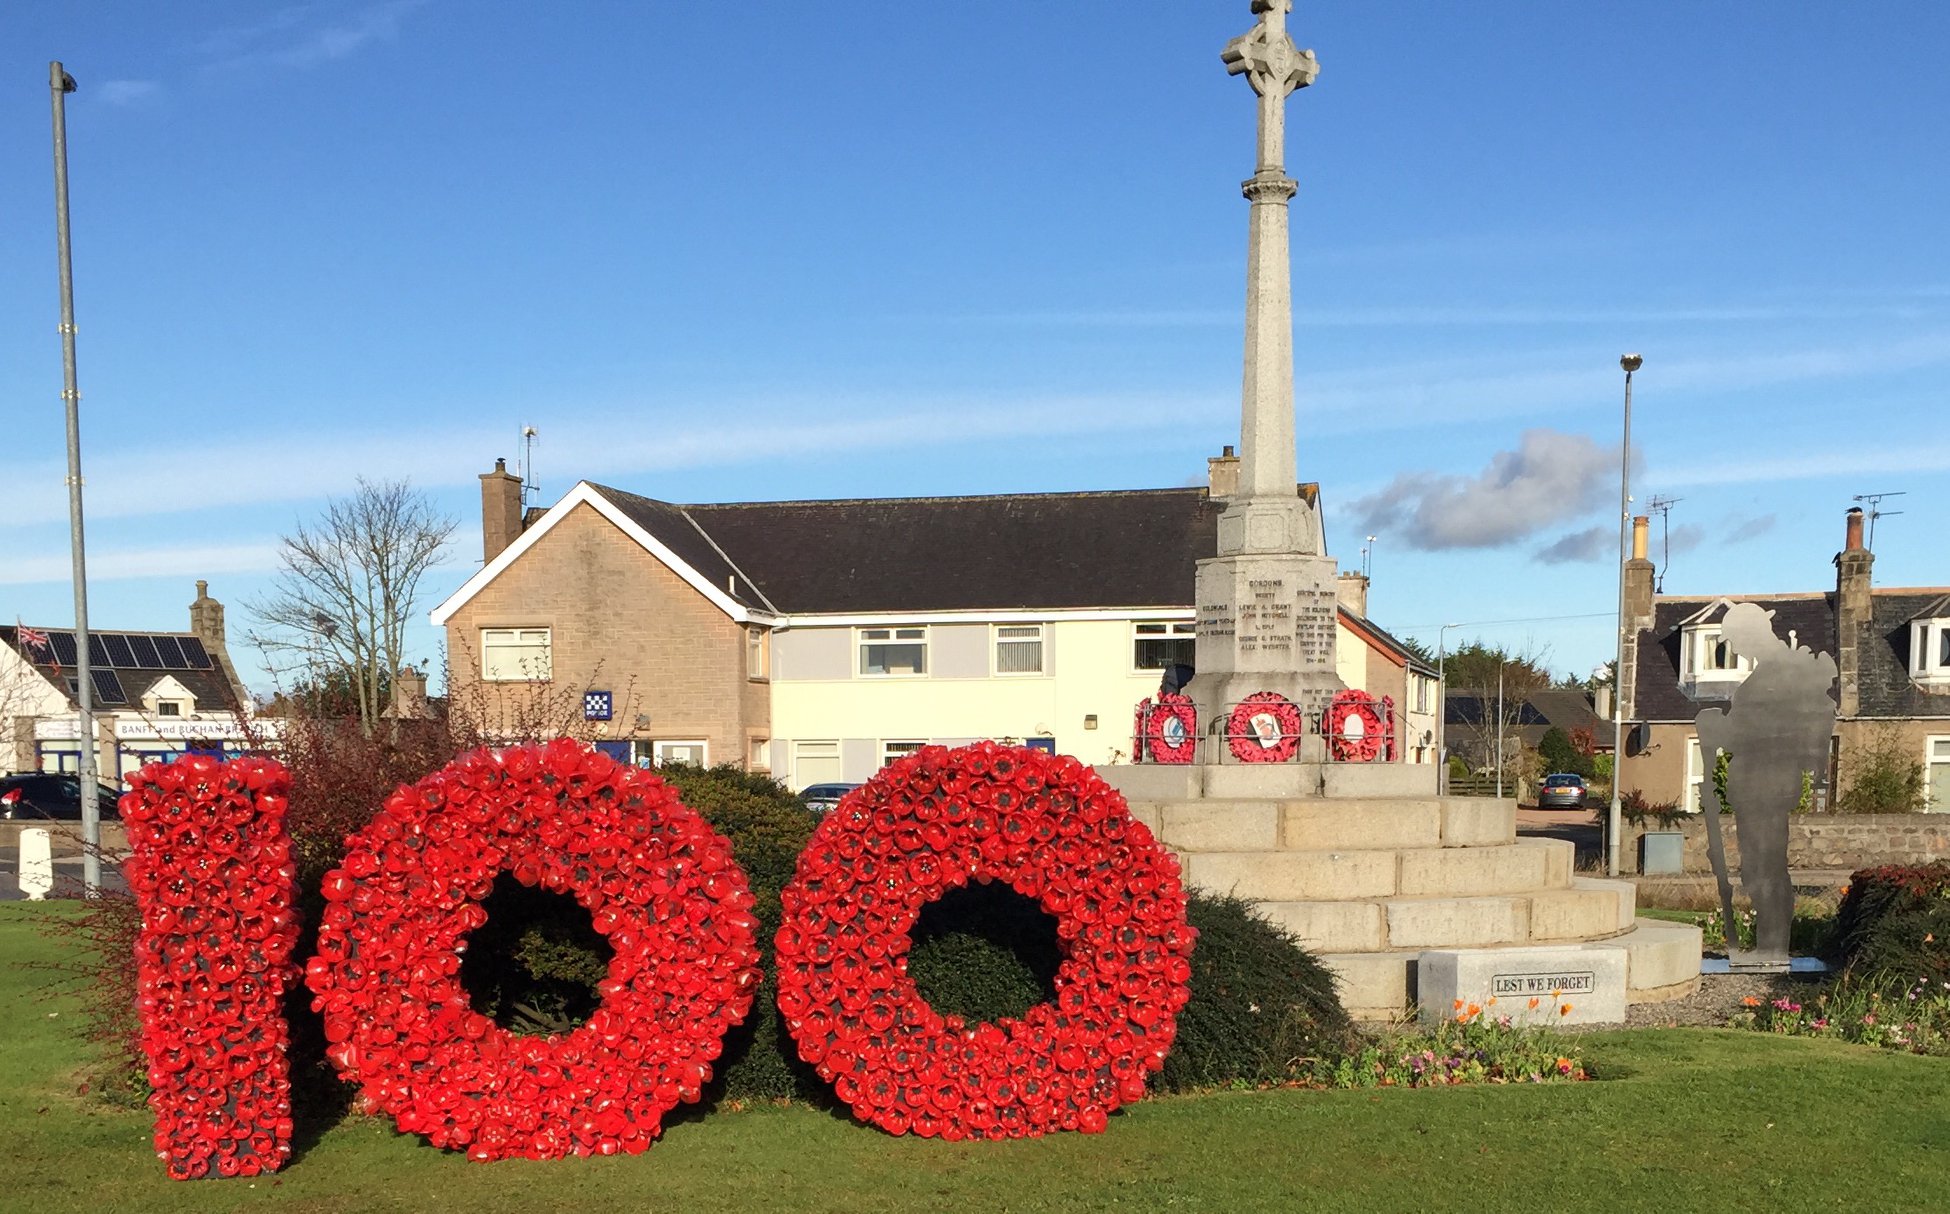 Mintlaw war memorial has been decorated to mark 100 years since the First World War.